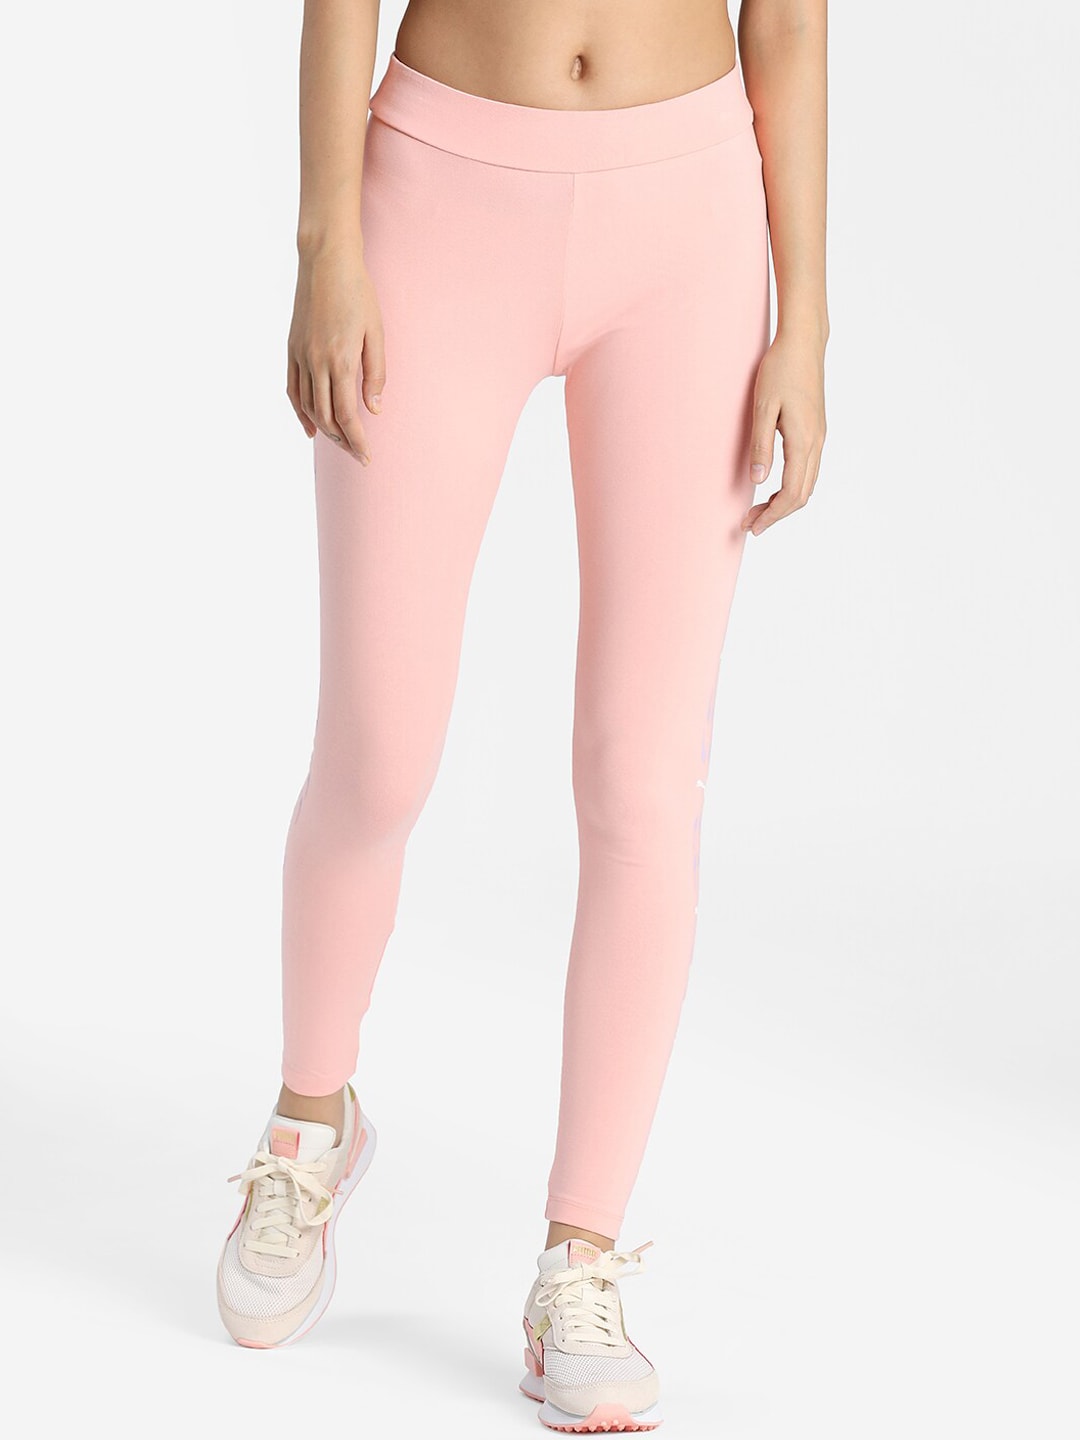 Puma Women Pink Tights Price in India